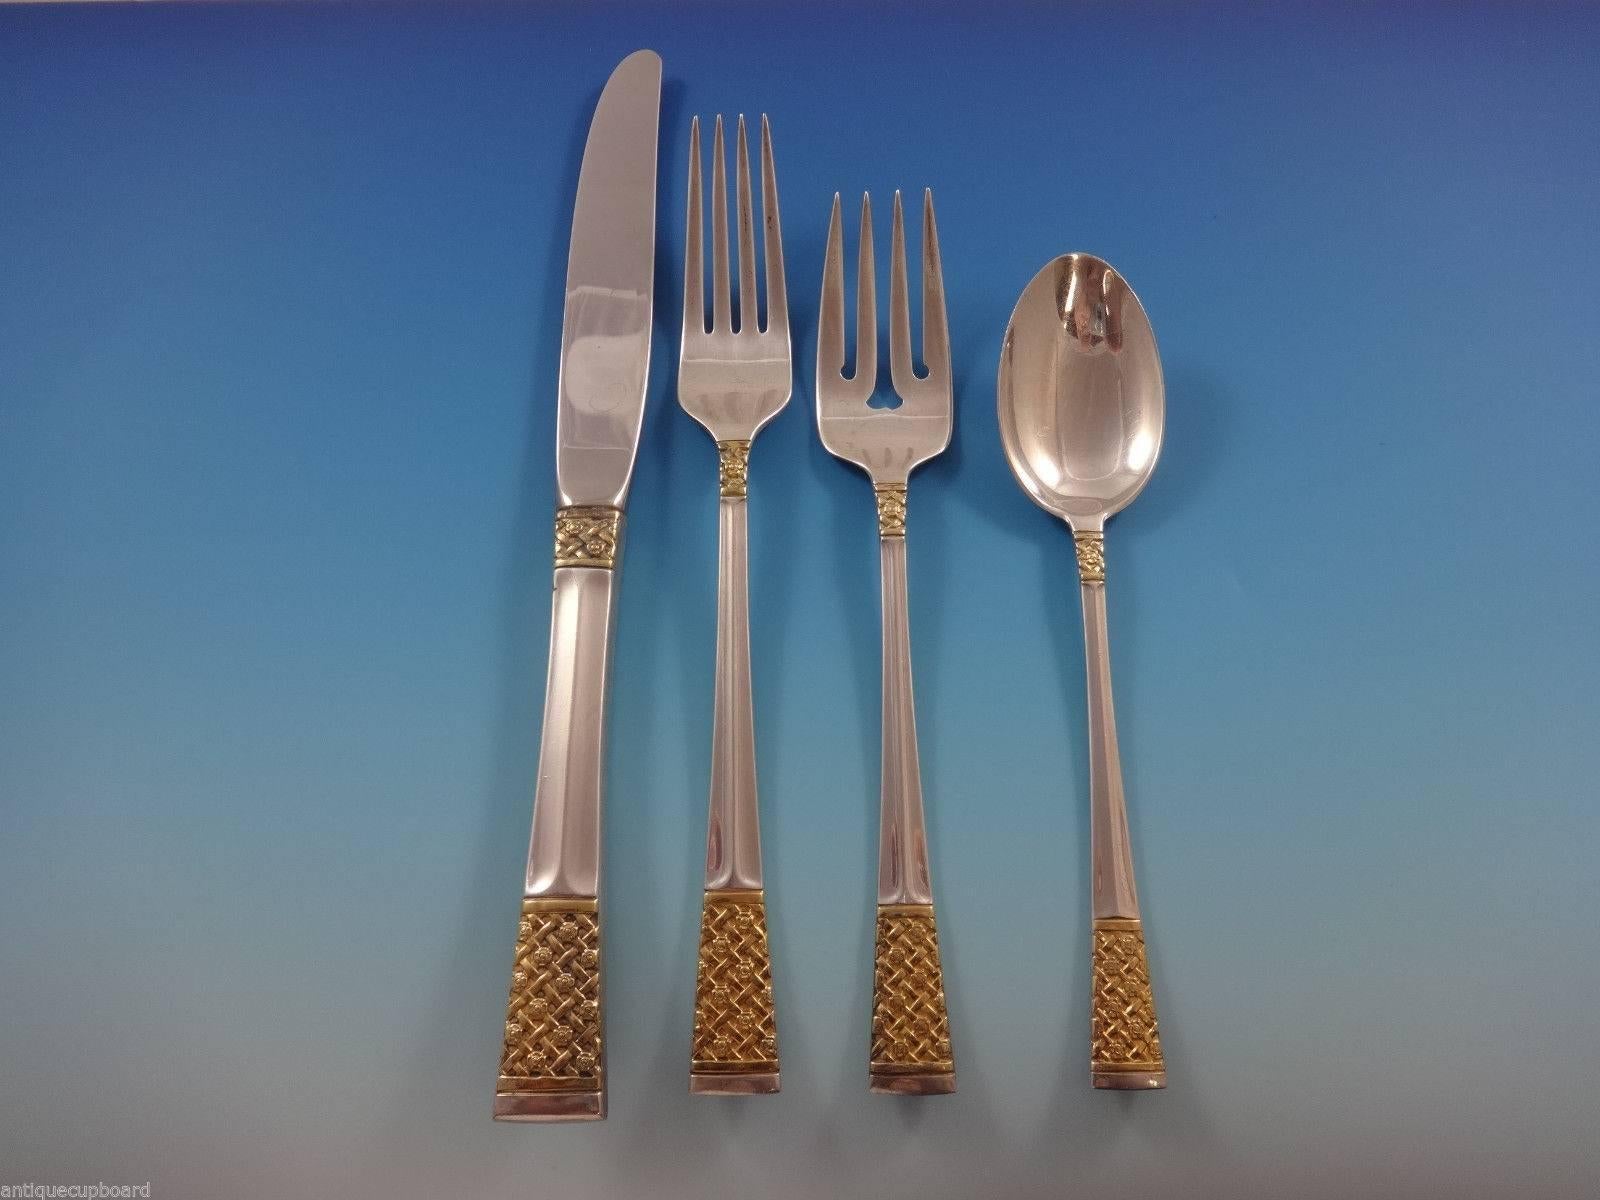 Golden Columbine by Lunt sterling silver with gold accent Flatware set of 32 Pieces. This set includes:

Eight knives, 9